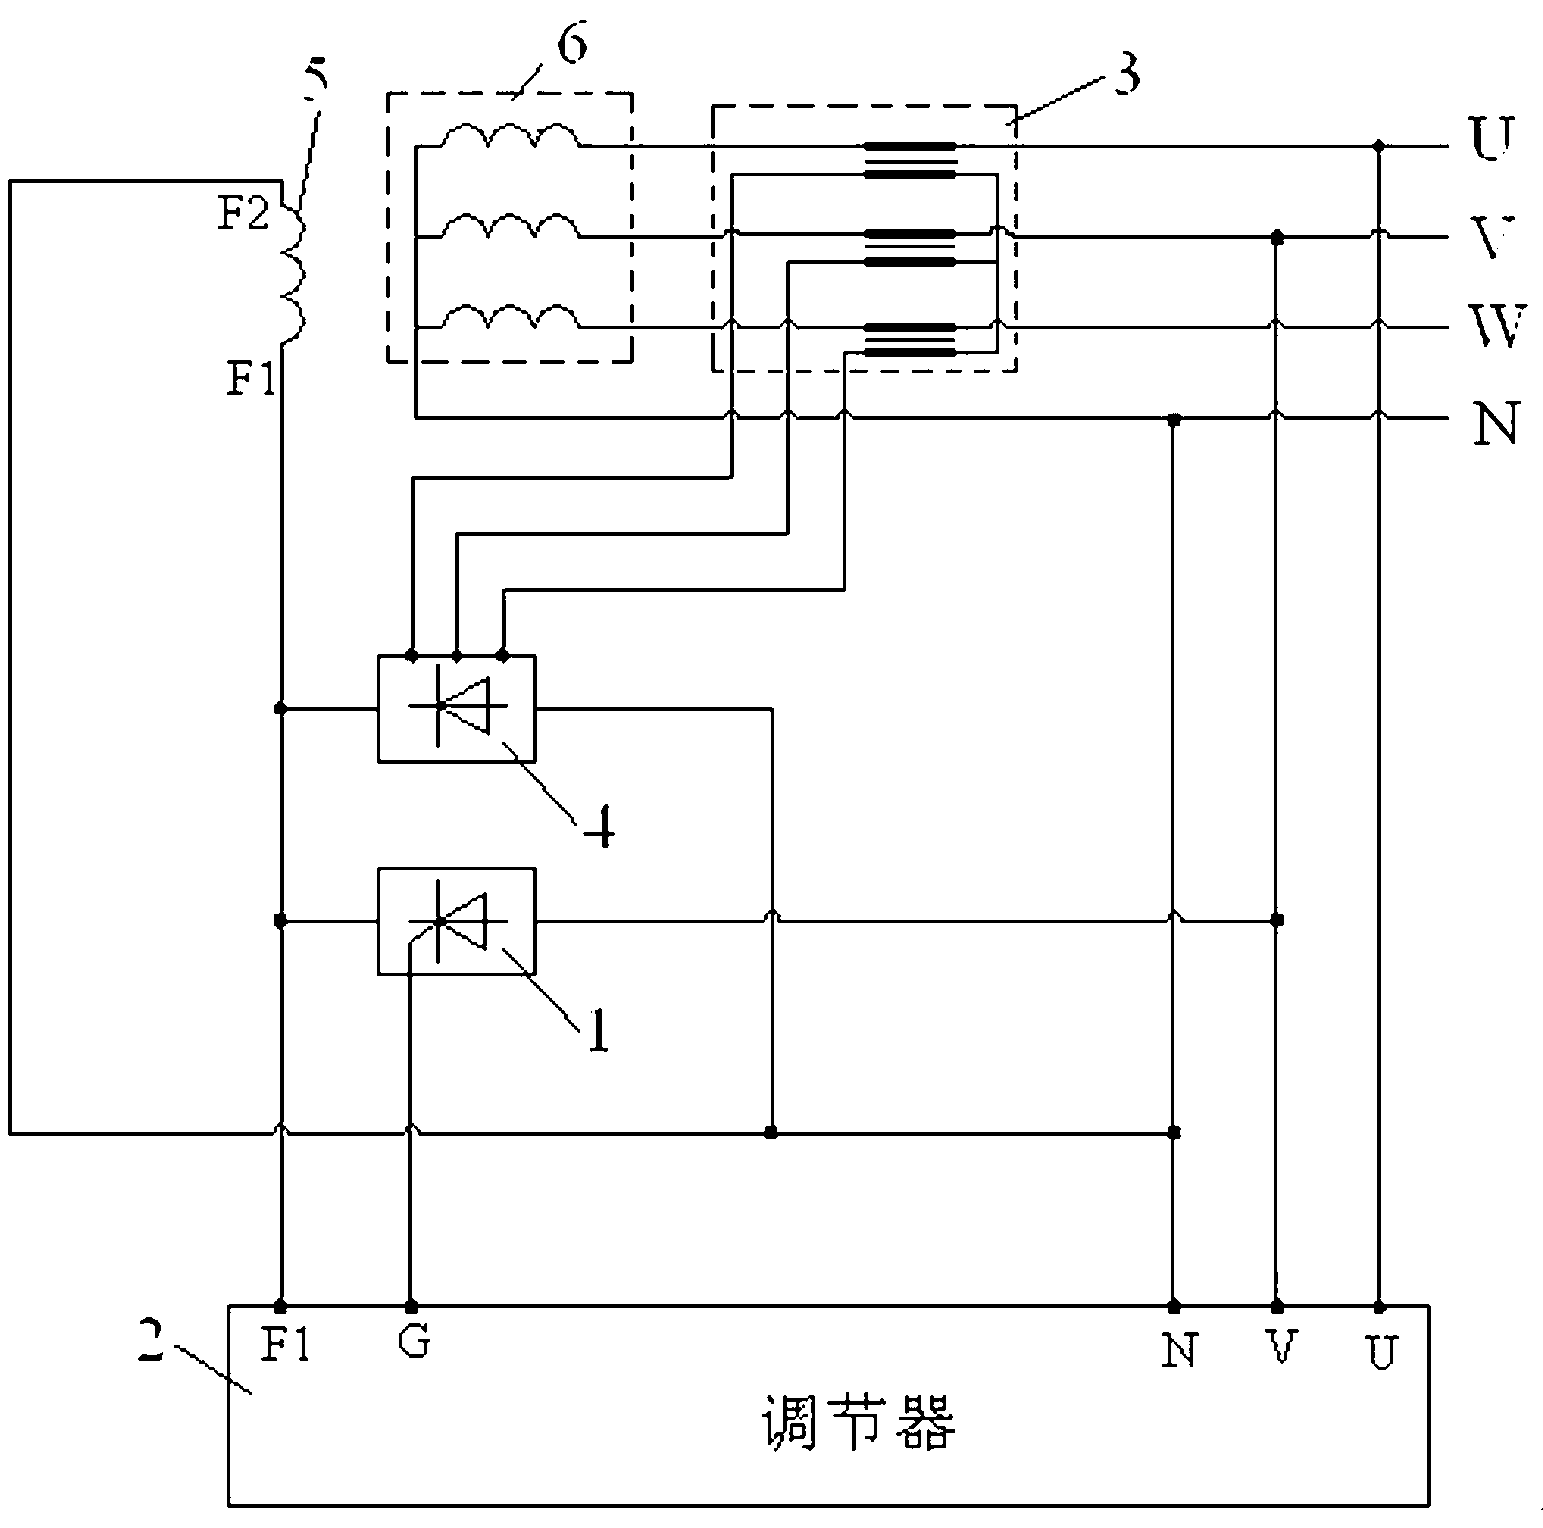 Parallel type excitation device with current feedback and controllable excitation functions